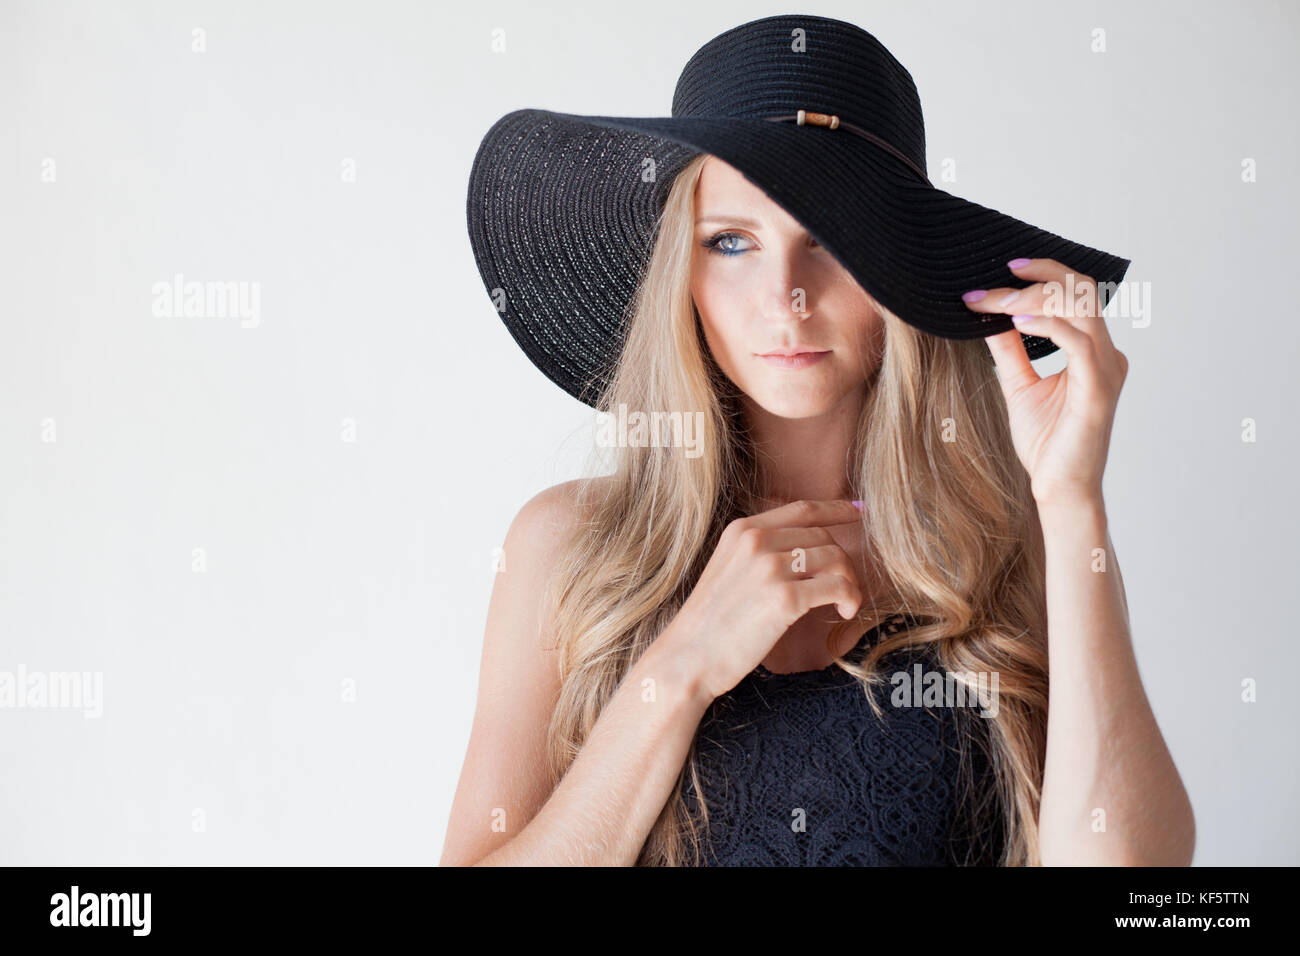 fashionable girl in a hat with a brim poses for advertising Stock Photo